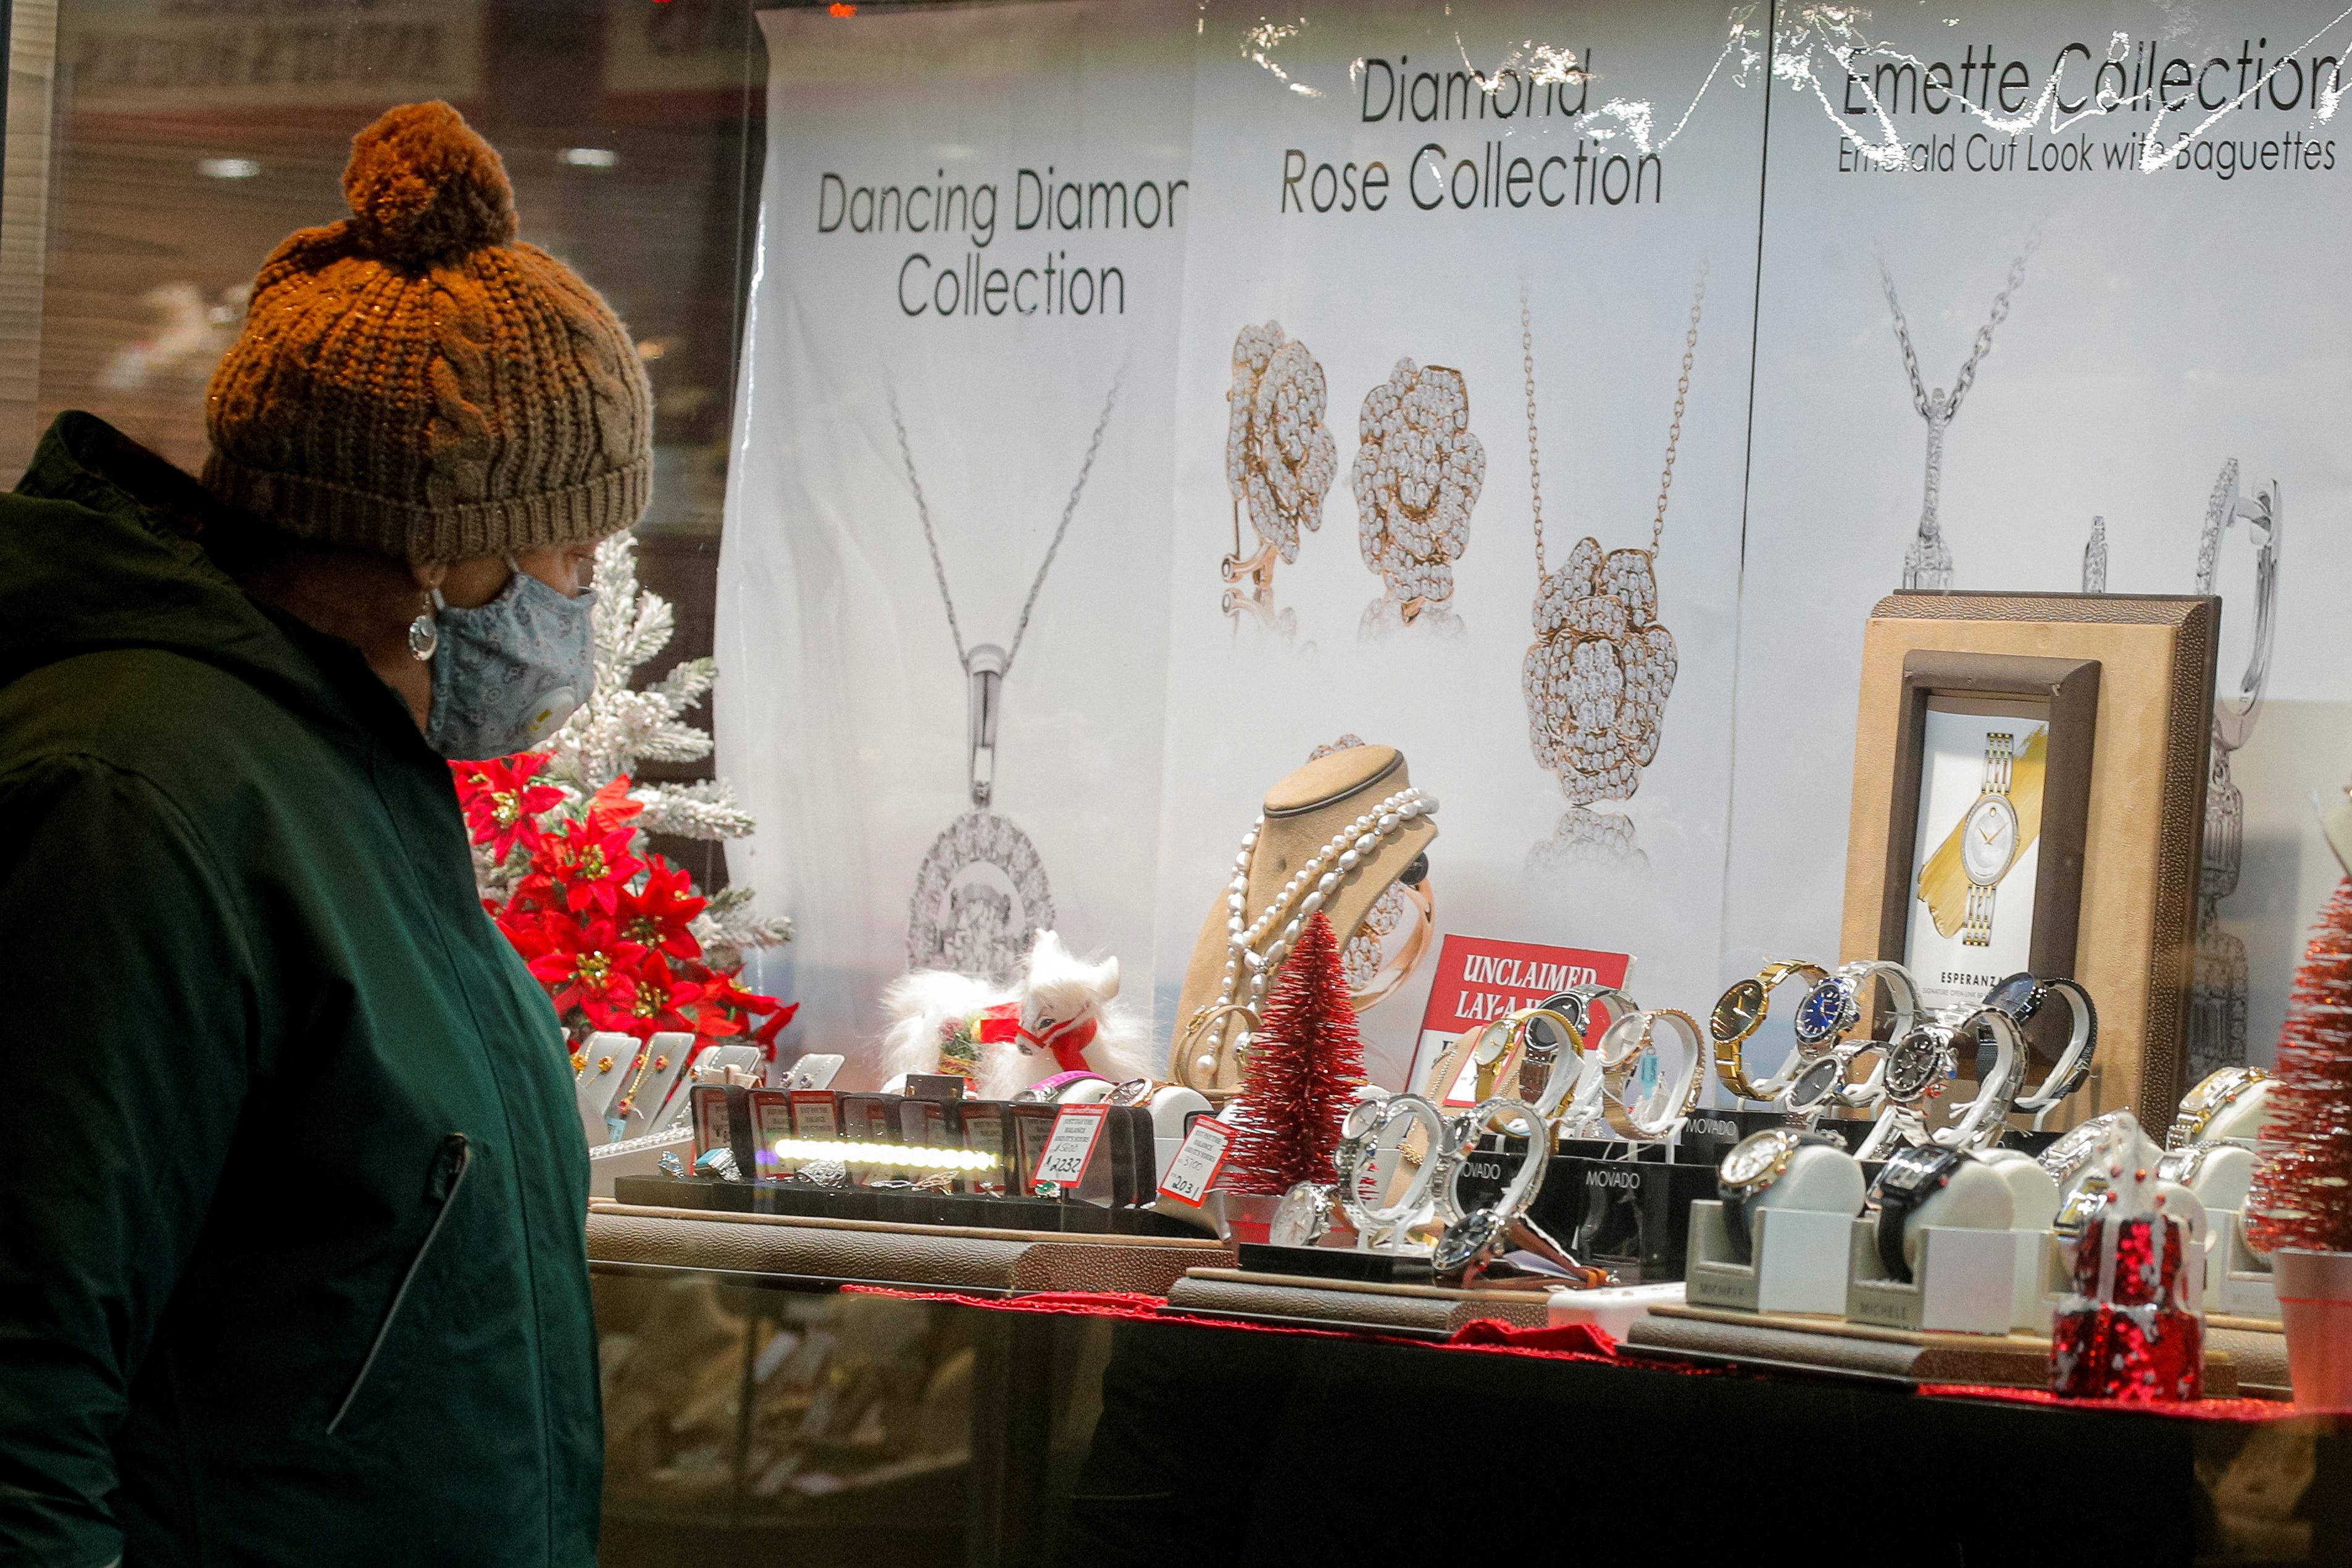 A shopper looks at jewelry in a store window in Brooklyn, New York